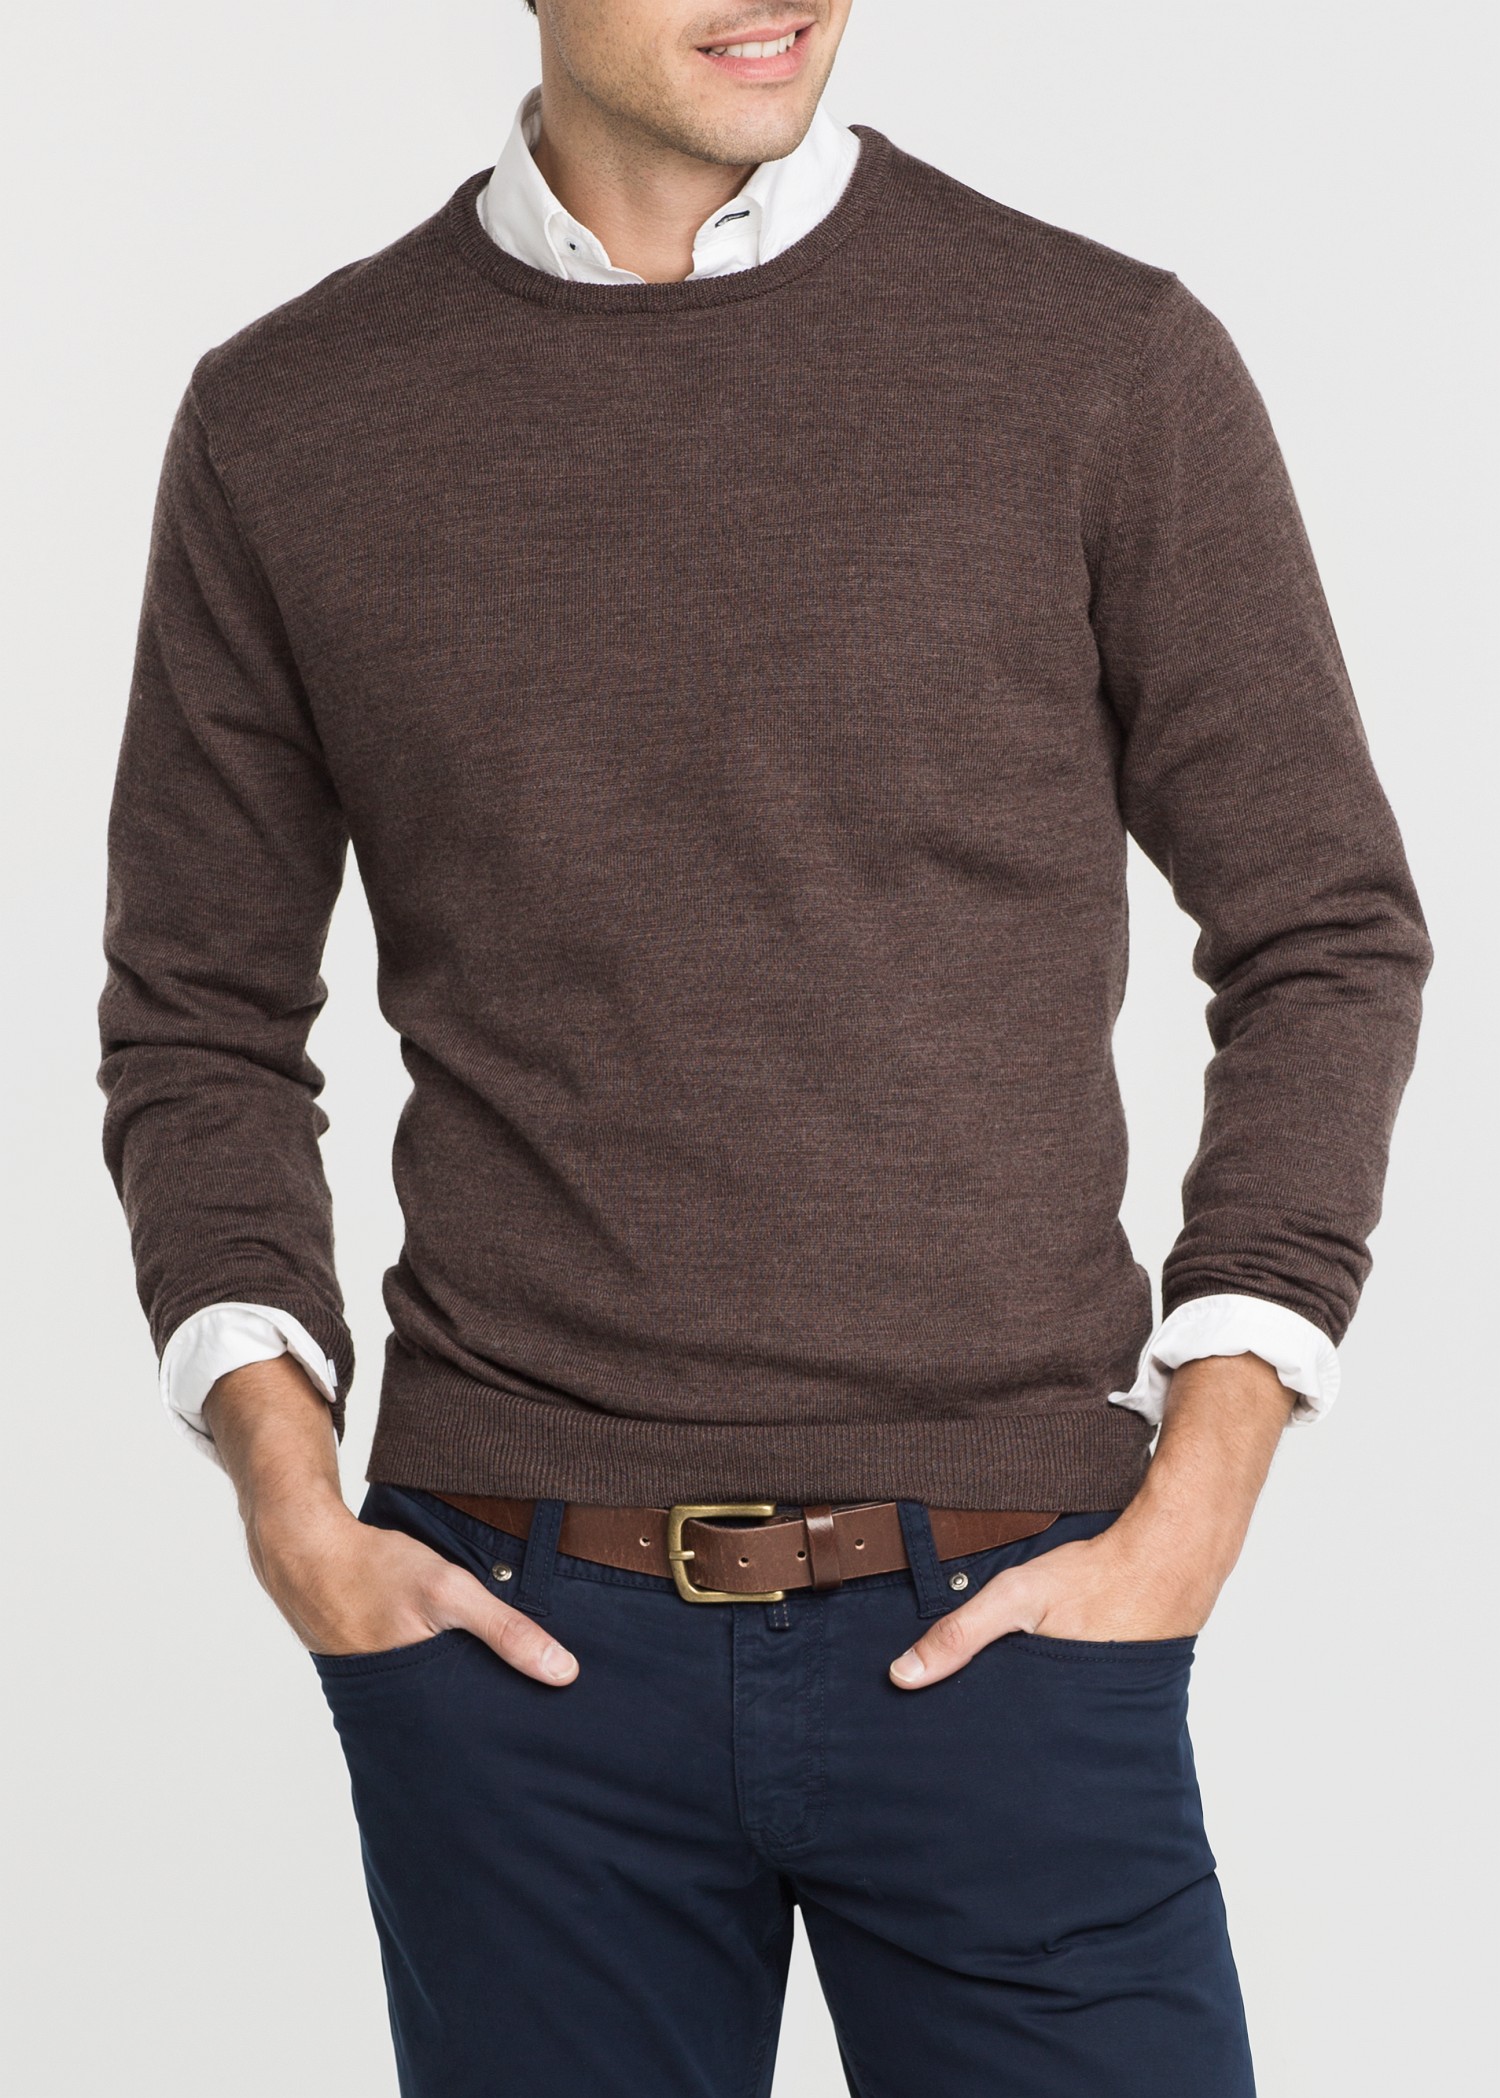 mens elbow patch sweater